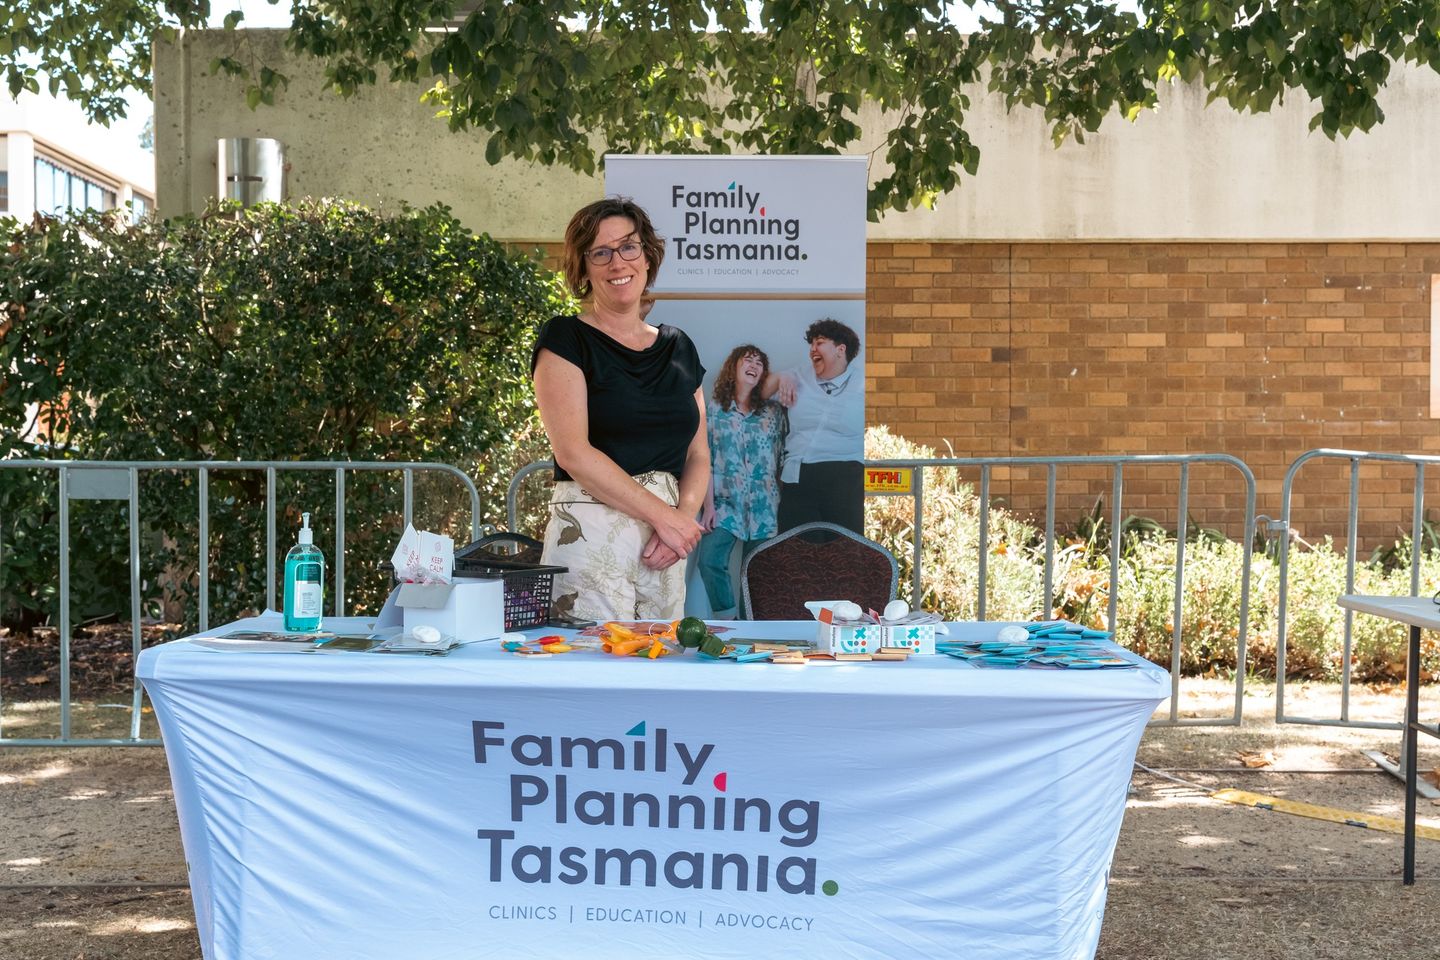 Clinical Nurse Alison smiling behind the table with a tablecloth that reads "Family Planning Tasmania" holding a stall promoting health at an event.